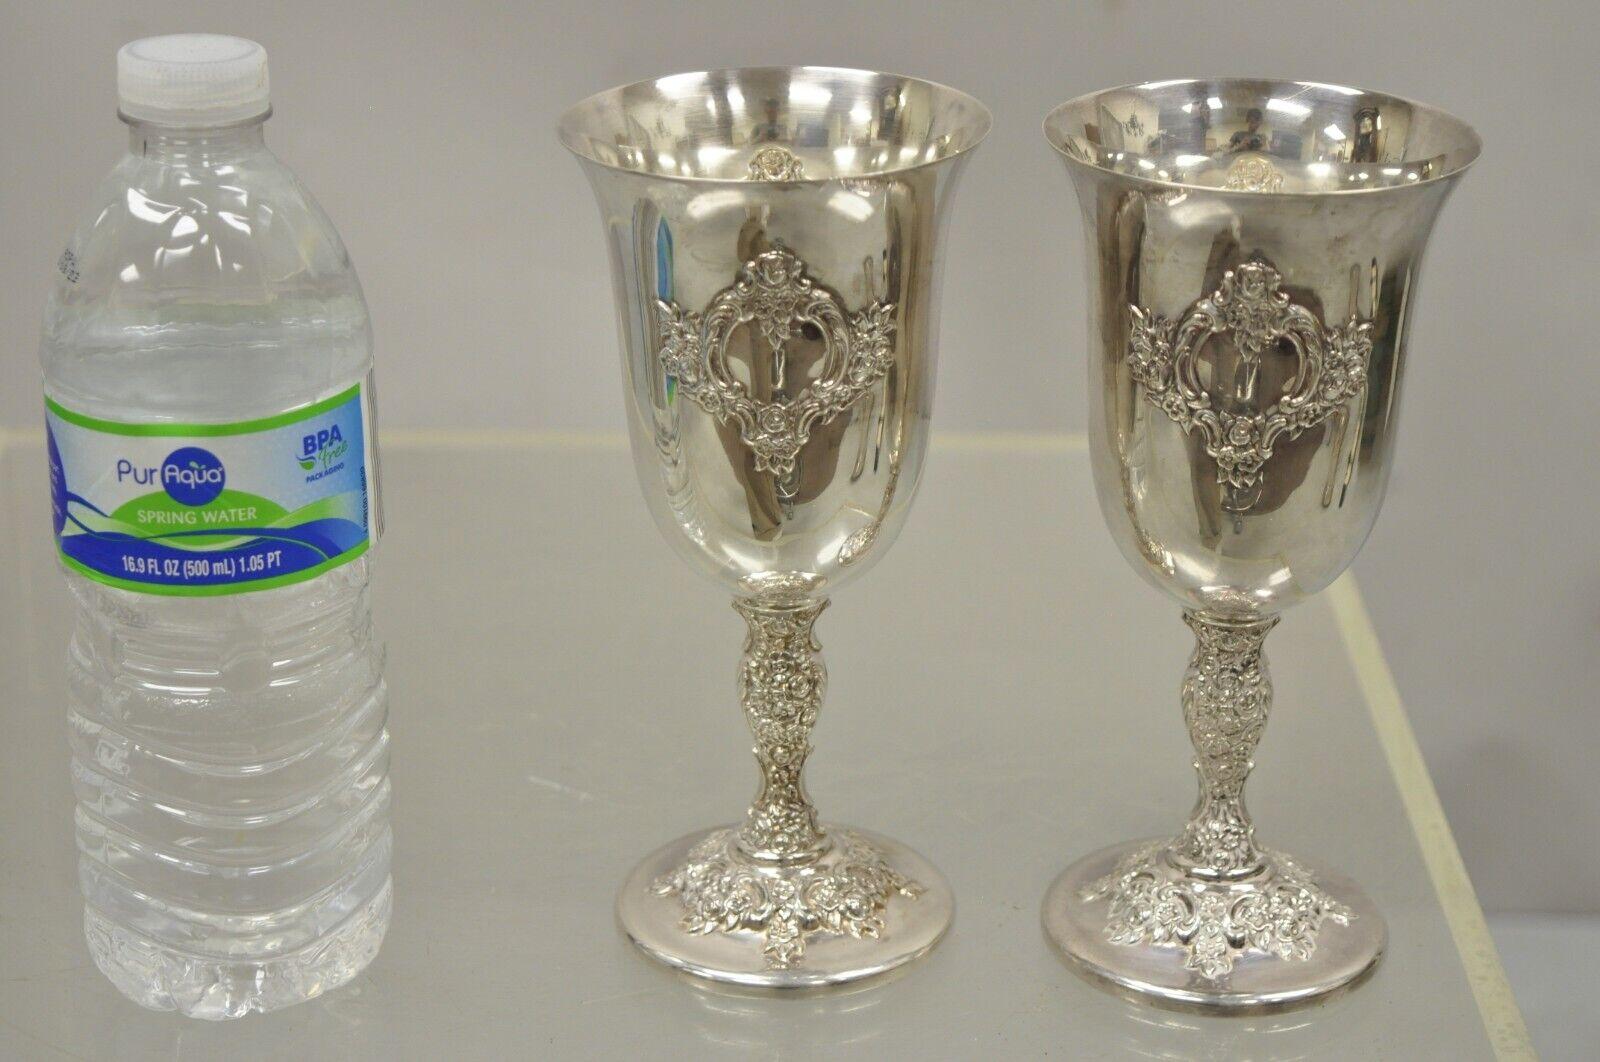 International silver Du Barry 7995 silver plated wine goblet cups - a pair. Circa early to mid 1900s. Measurements: 7